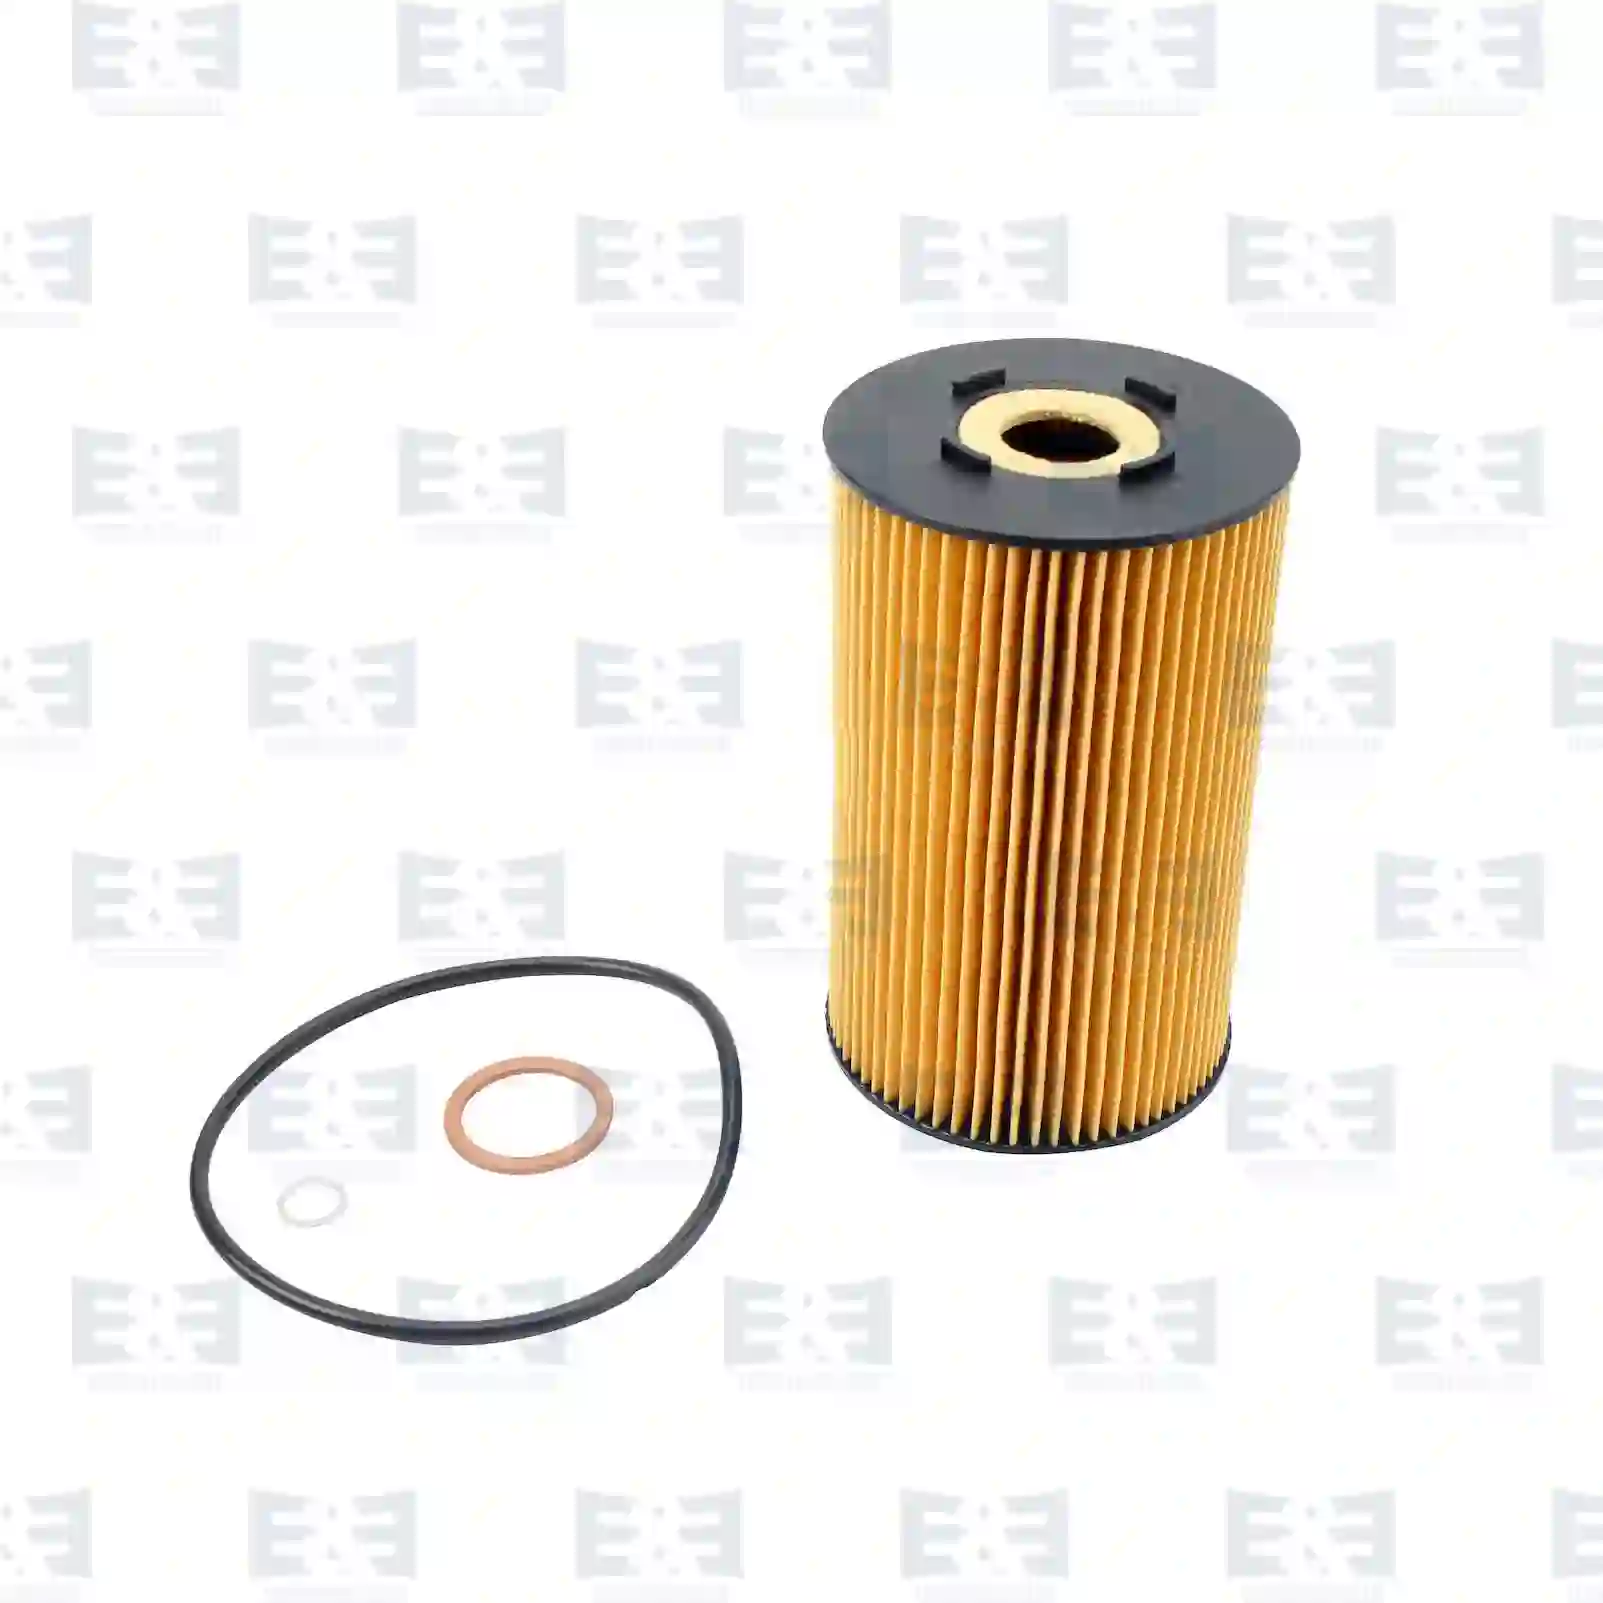 Oil Filter Oil filter insert, EE No 2E2200516 ,  oem no:009889003, 9839003, 0001336380, 1500977, 211340, 236481, 13113674, 64991200, 12153208, 30301, 60541290003, F139207310510, F139207310511, 5000869, 236481, 25012769, 7984871, 7984871, 0009839003, 9839003, 01229988, 122998800, 24151104, 6750492156, AT260213, 570958308, 7211208, 30301, 0001800909, 0011844125, 0011844425, 0011845125, 0011845425, 0011845455, 3141800109, 3641800009, 3641800109, 364180010967, 3641800110, 3641800309, 3641840225, 3661841225, 605411820405, 6054129003, 605412970003, 905412970003, 0001229988, 0024151104, 0122998800, 5001846627, 6005019805, 6005019823, 6750492156, LU225, 15613-98001, 34318-47425 E&E Truck Spare Parts | Truck Spare Parts, Auotomotive Spare Parts